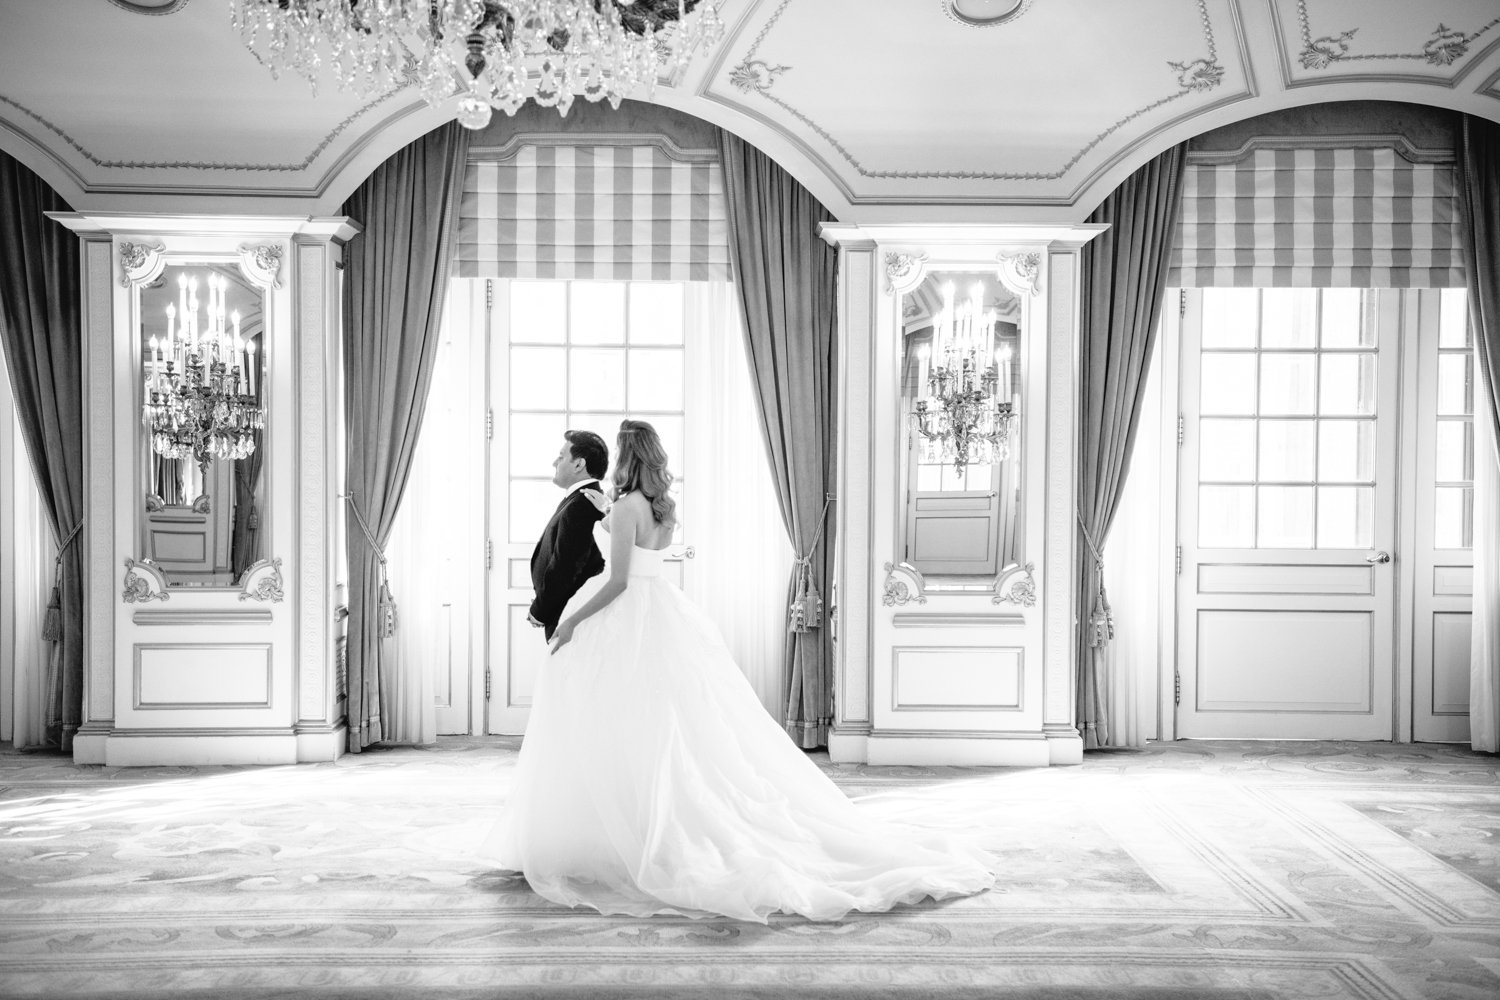 In the St. Regis in Manhattan, the groom is standing facing the end of the room and the bride taps his shoulder from behind him.

Manhattan Luxury Wedding. New York Luxury Wedding Photographer. Wedding in Manhattan. NYC Luxury Wedding.